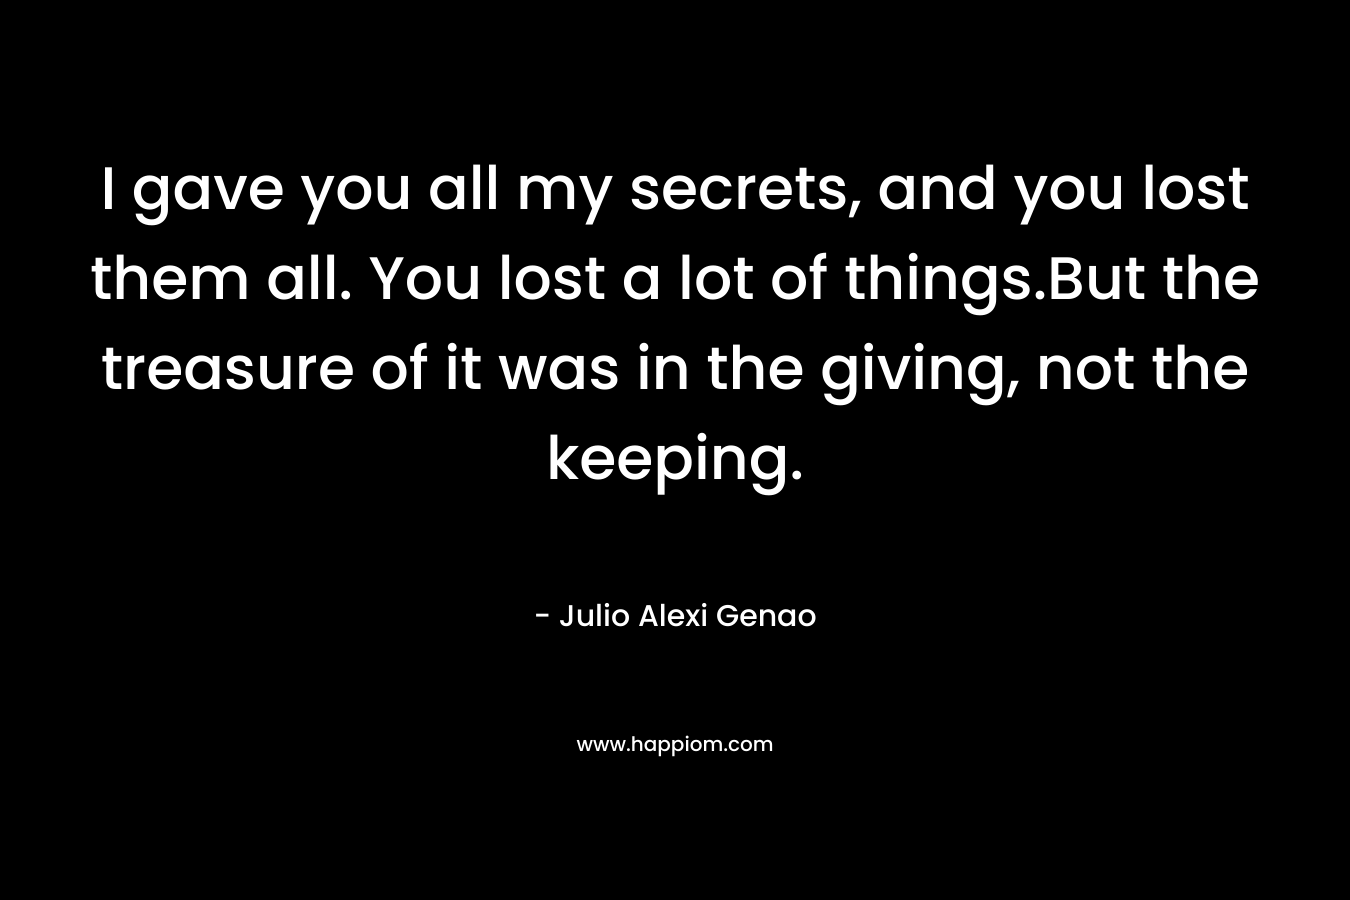 I gave you all my secrets, and you lost them all. You lost a lot of things.But the treasure of it was in the giving, not the keeping.